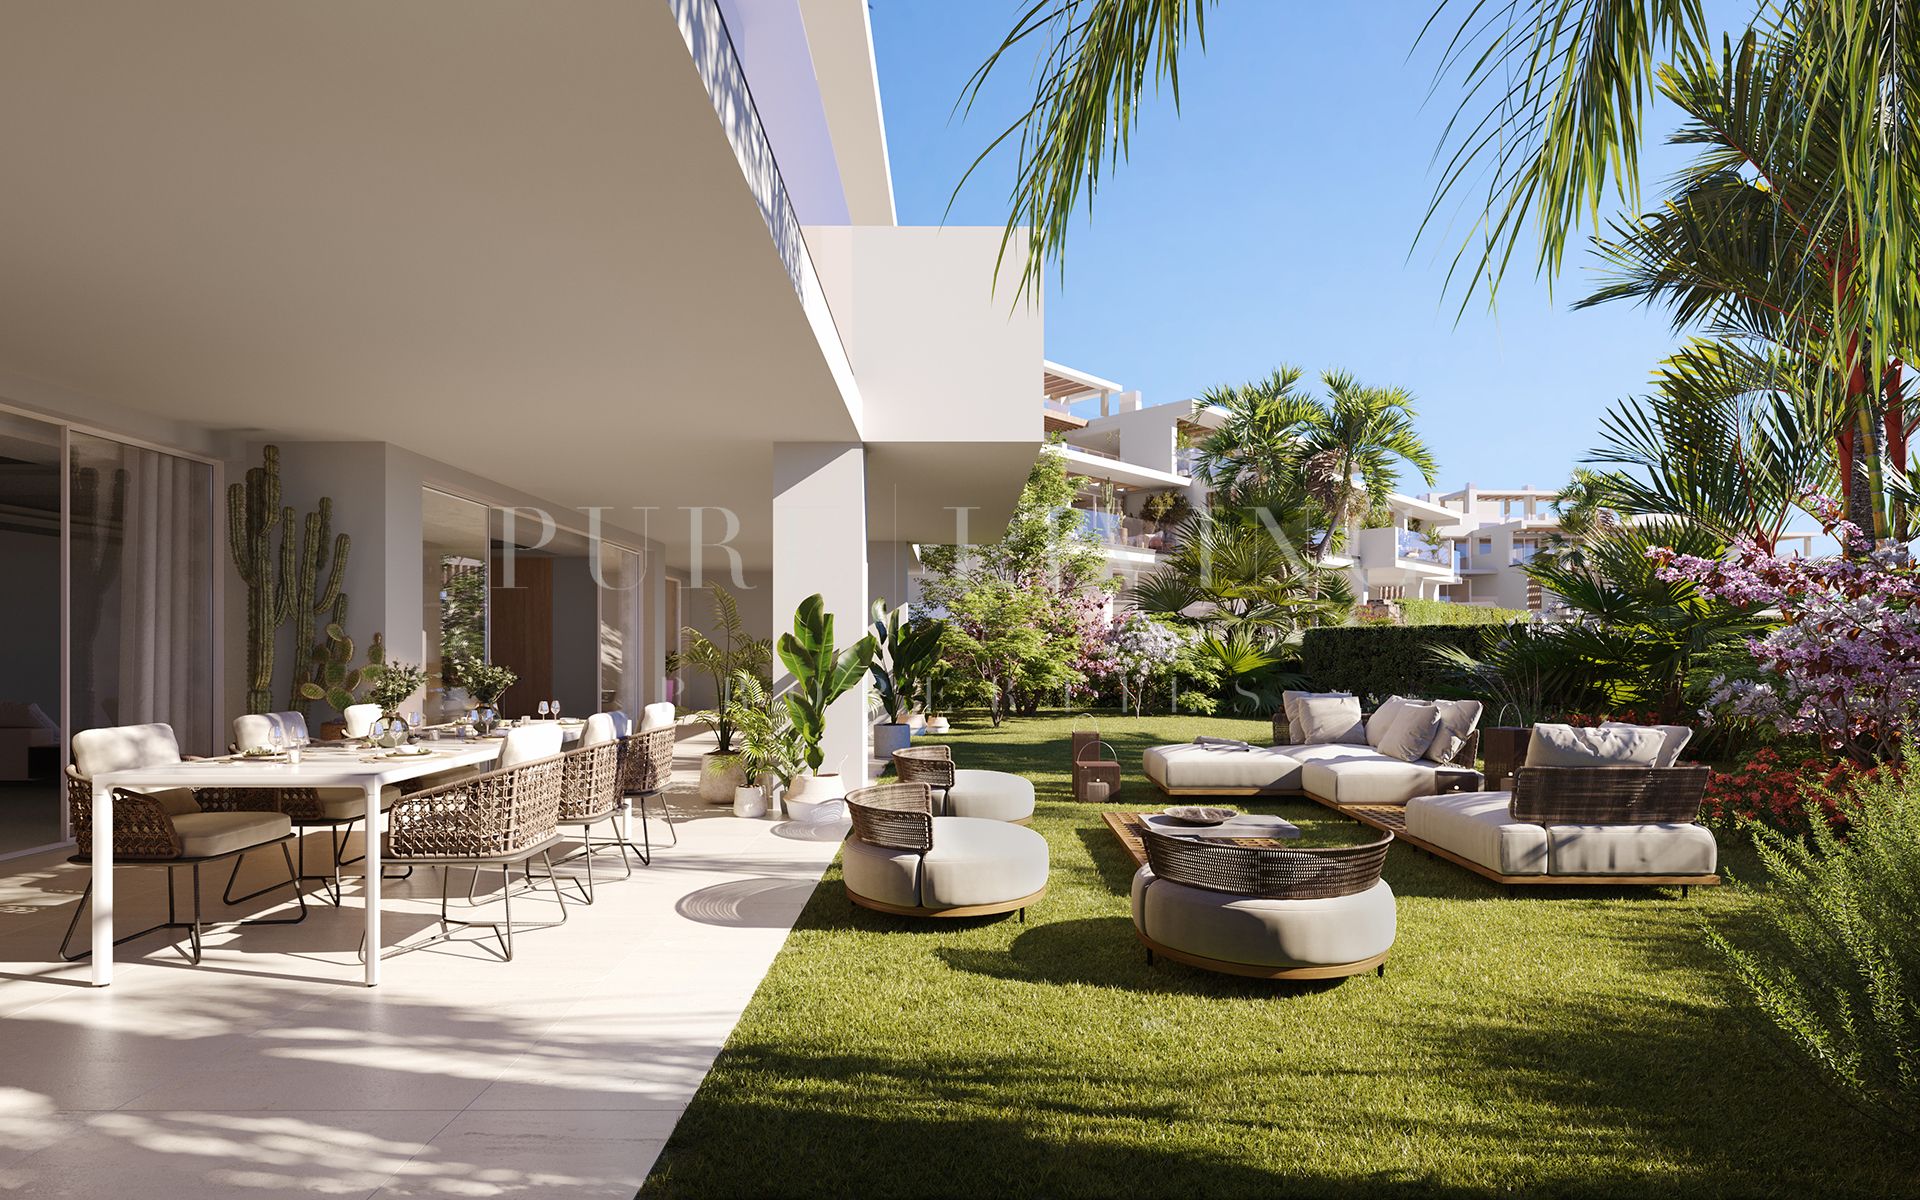 Exquisite 4-bedroom ground floor apartment within an exclusive, and secluded gated community in the Golden Mile, Marbella